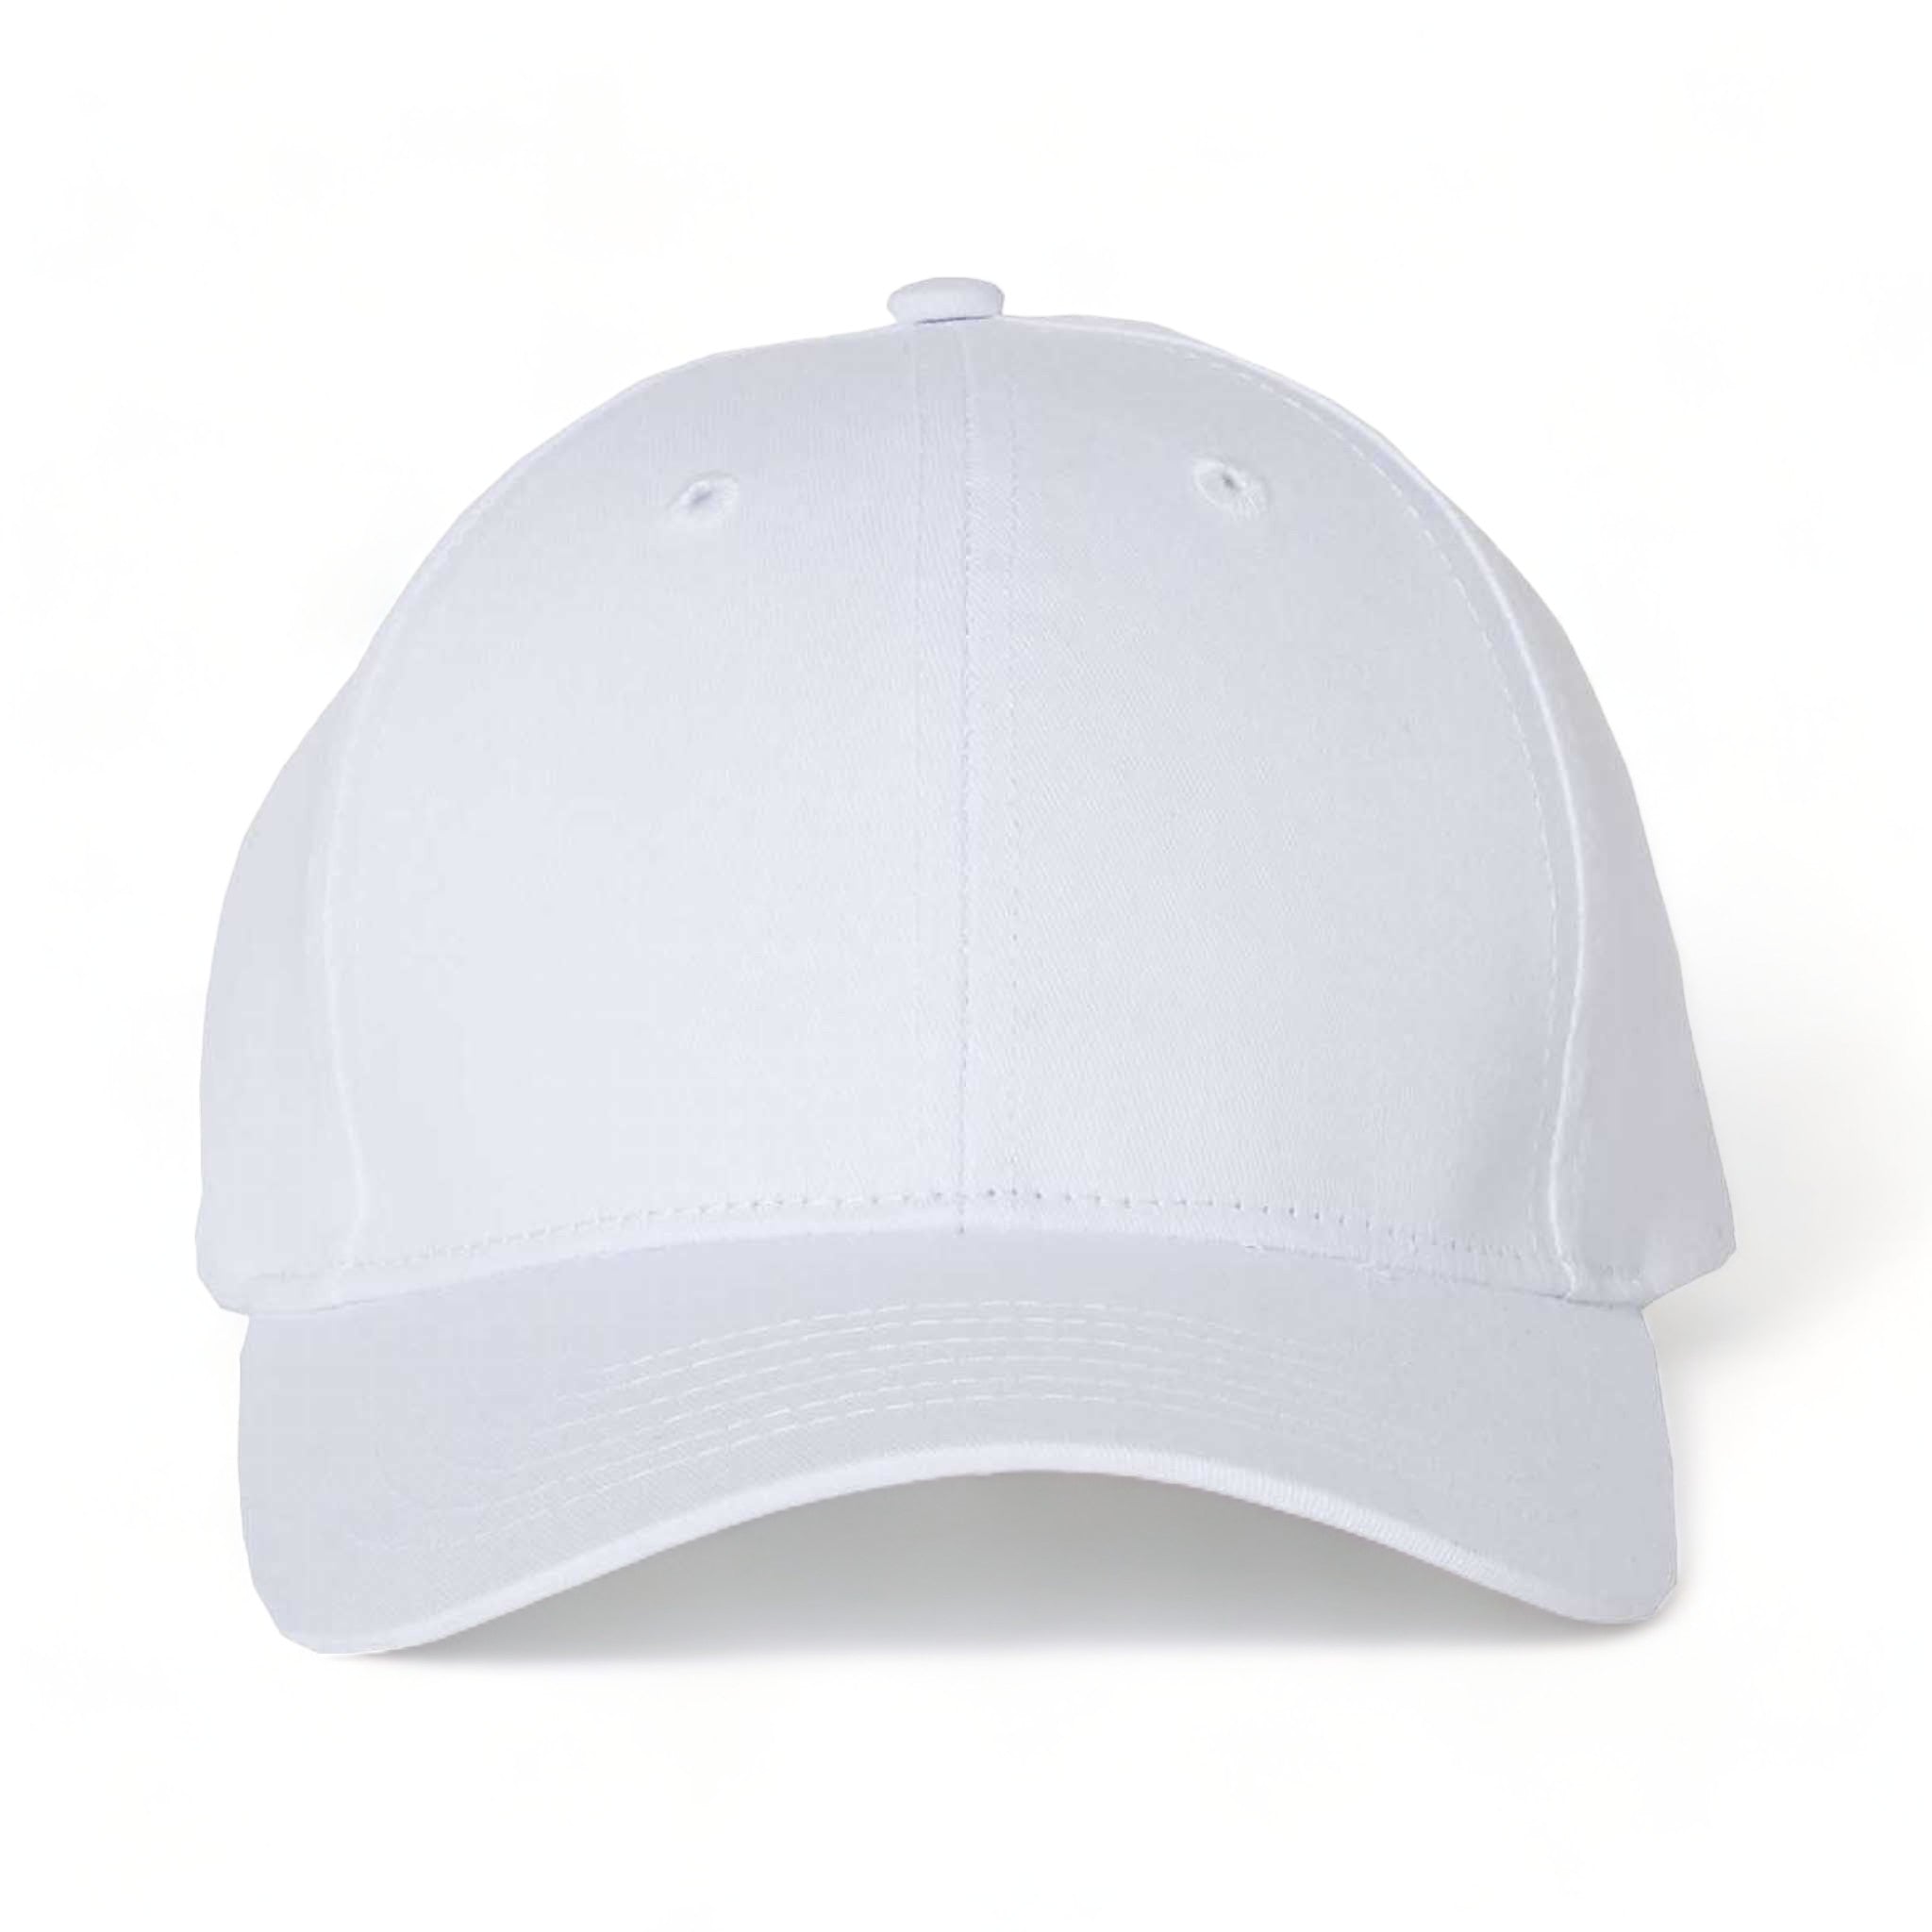 Front view of Sportsman 2260 custom hat in white